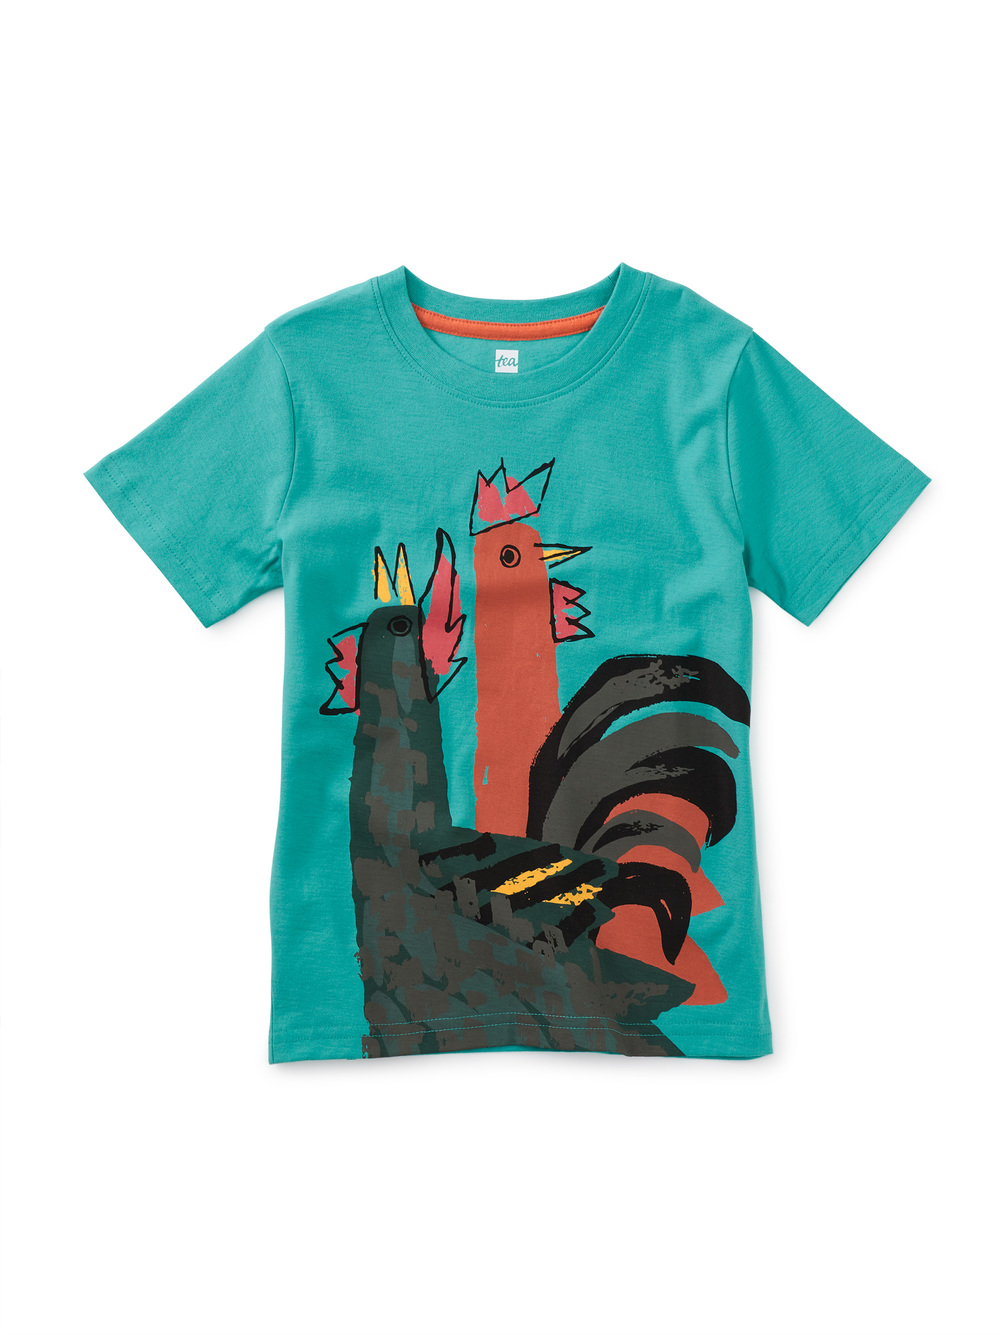 Rowdy Roosters Graphic Tee